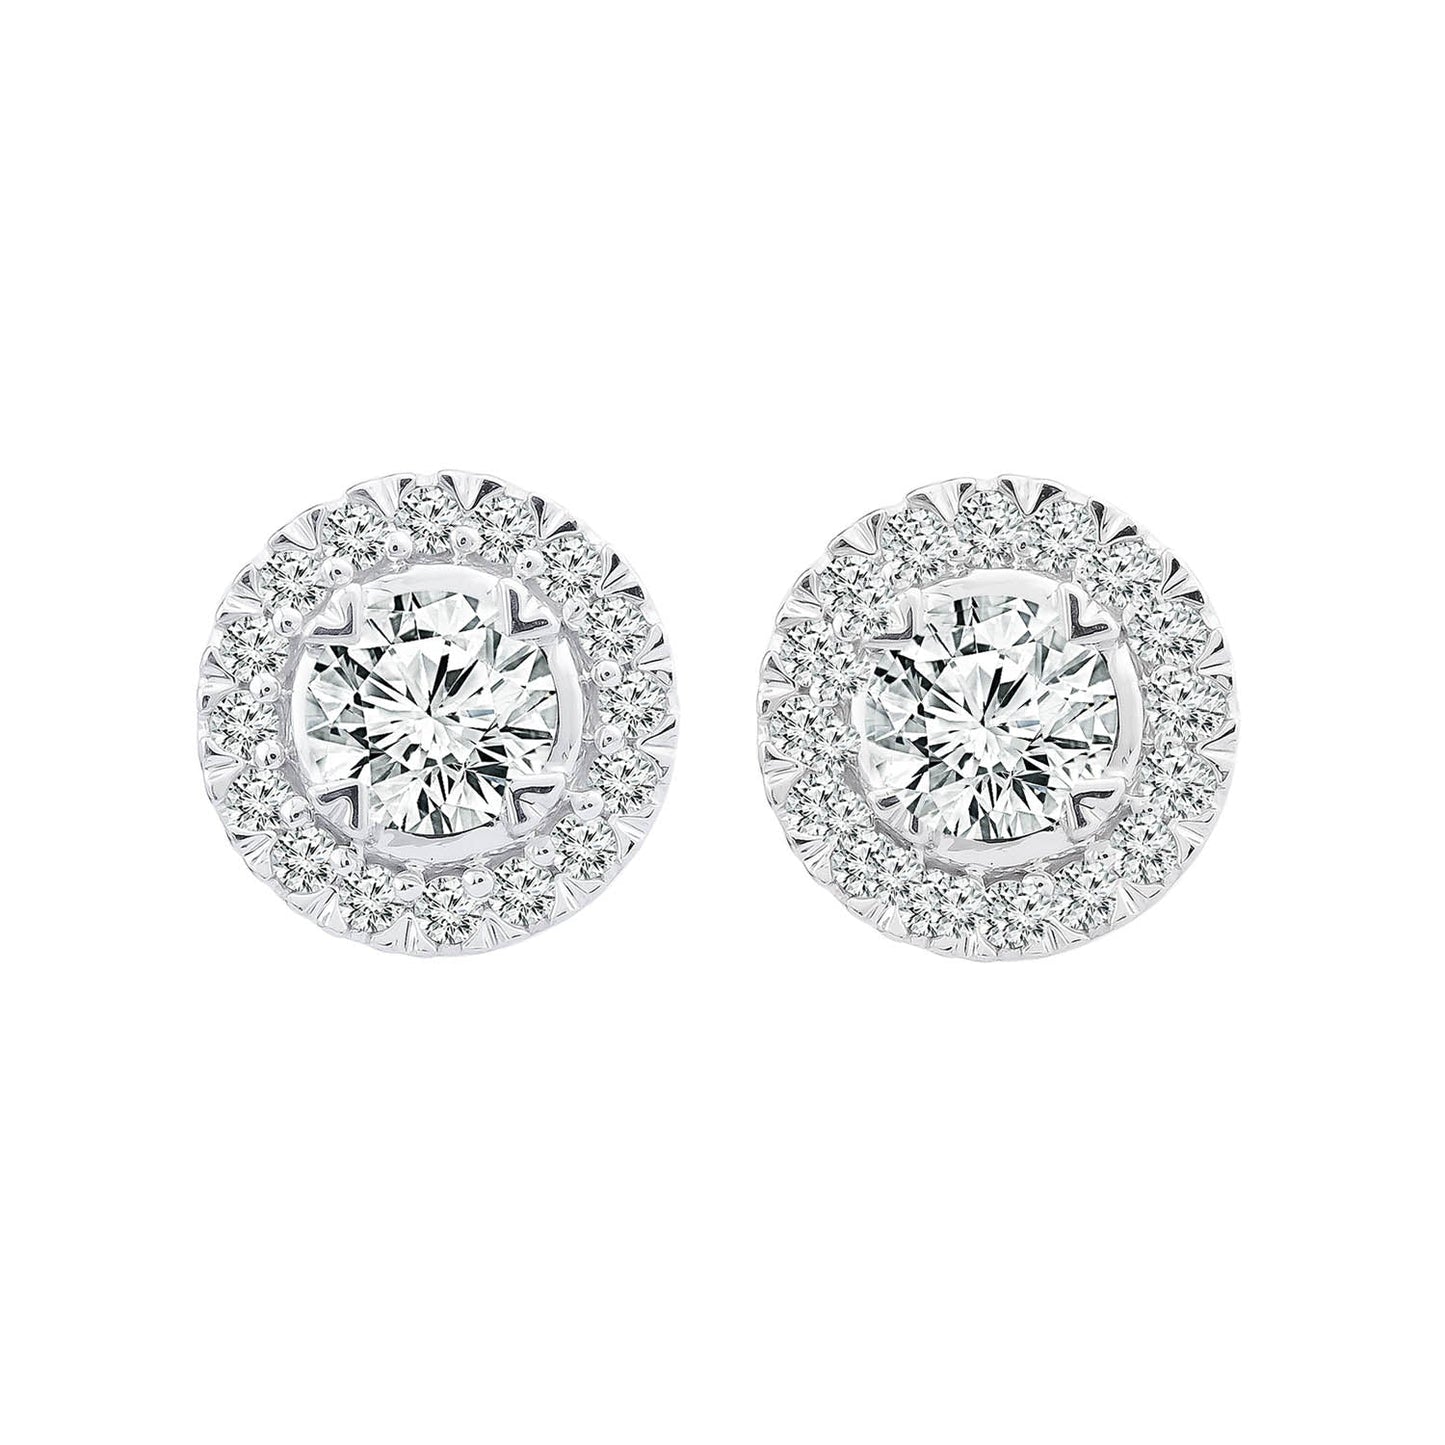 Halo Stud Earrings with 0.50ct Diamonds in 9K White Gold - EF-5121-W